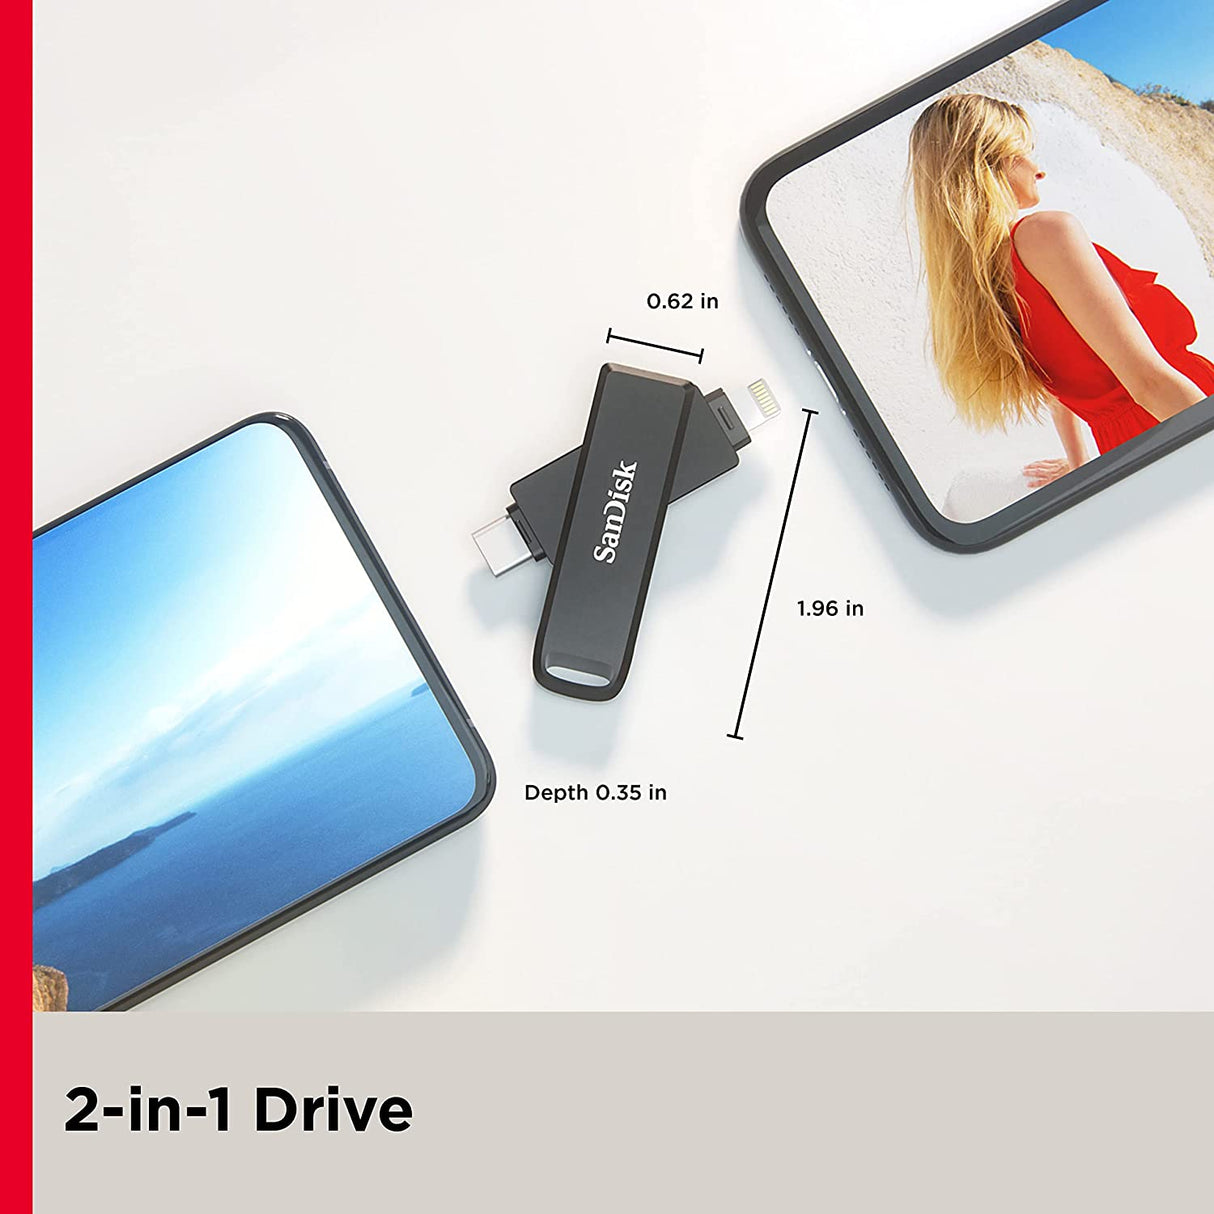 SanDisk 256GB iXpand Flash Drive Luxe for iPhone and USB Type-C Devices - SDIX70N-256G-GN6NE